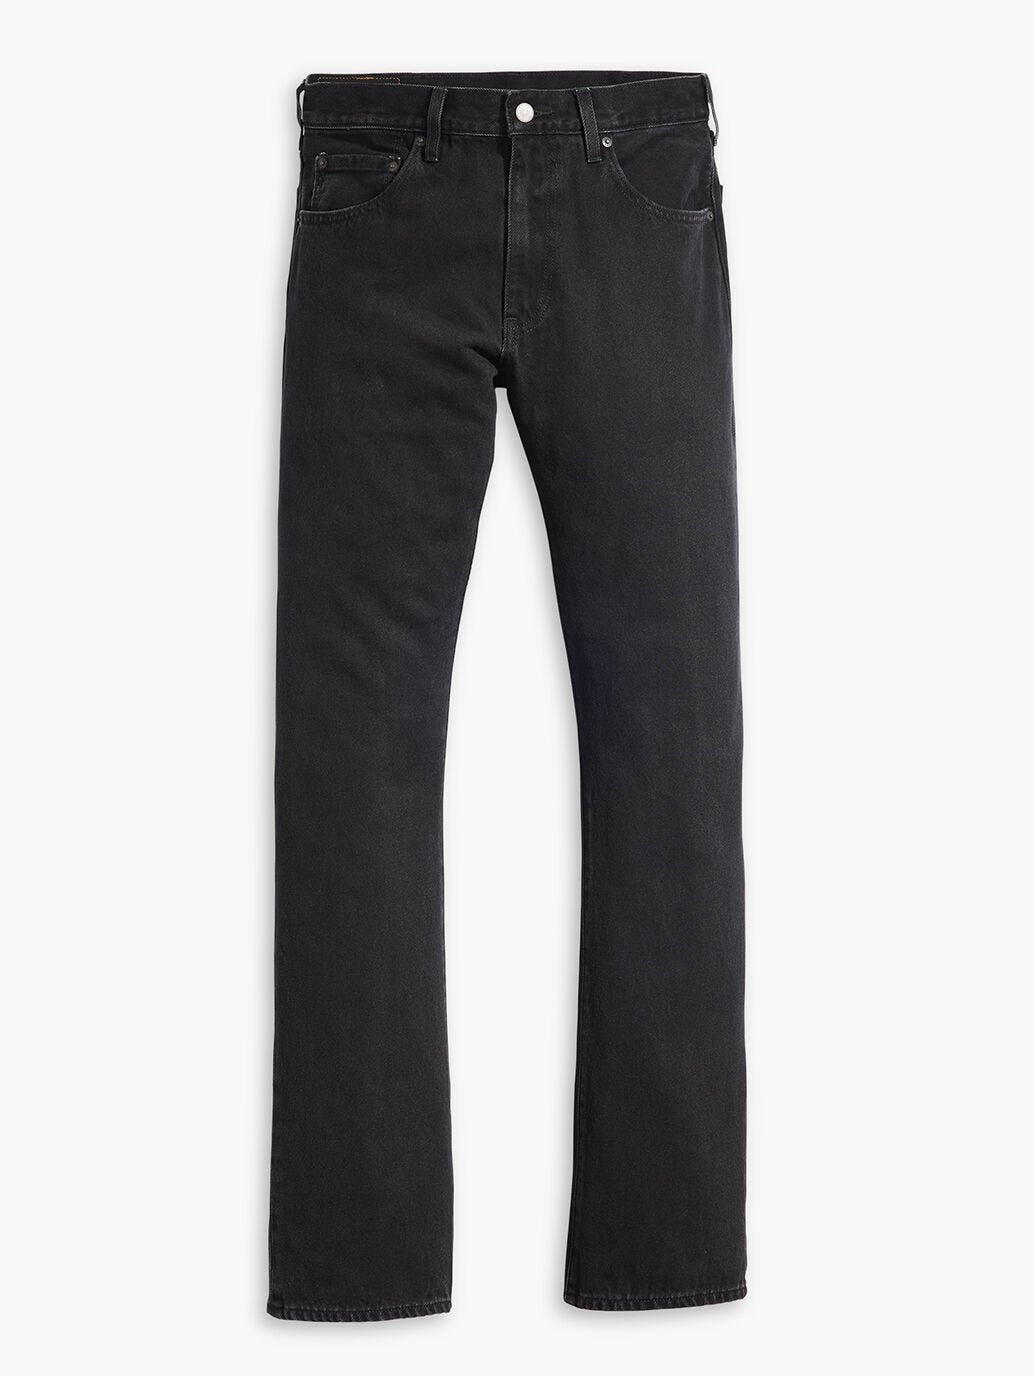 LEVIS 517 Bootcut Welcome To The Rodeo